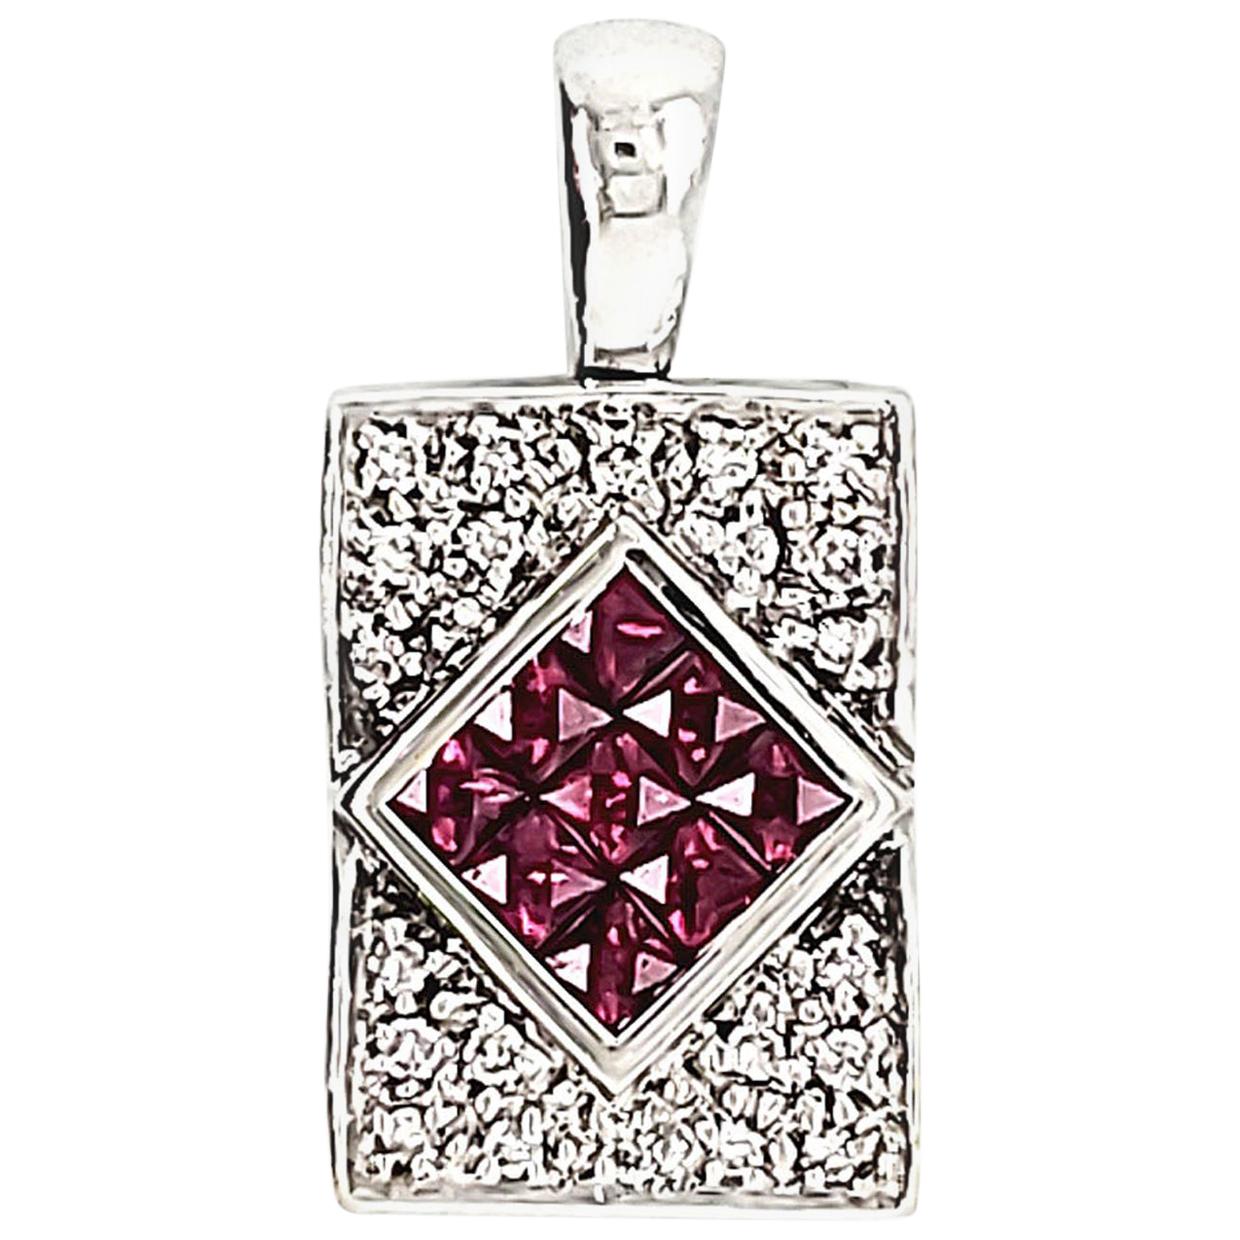 1.57 Carat Ruby and White Diamond Pendant Necklace